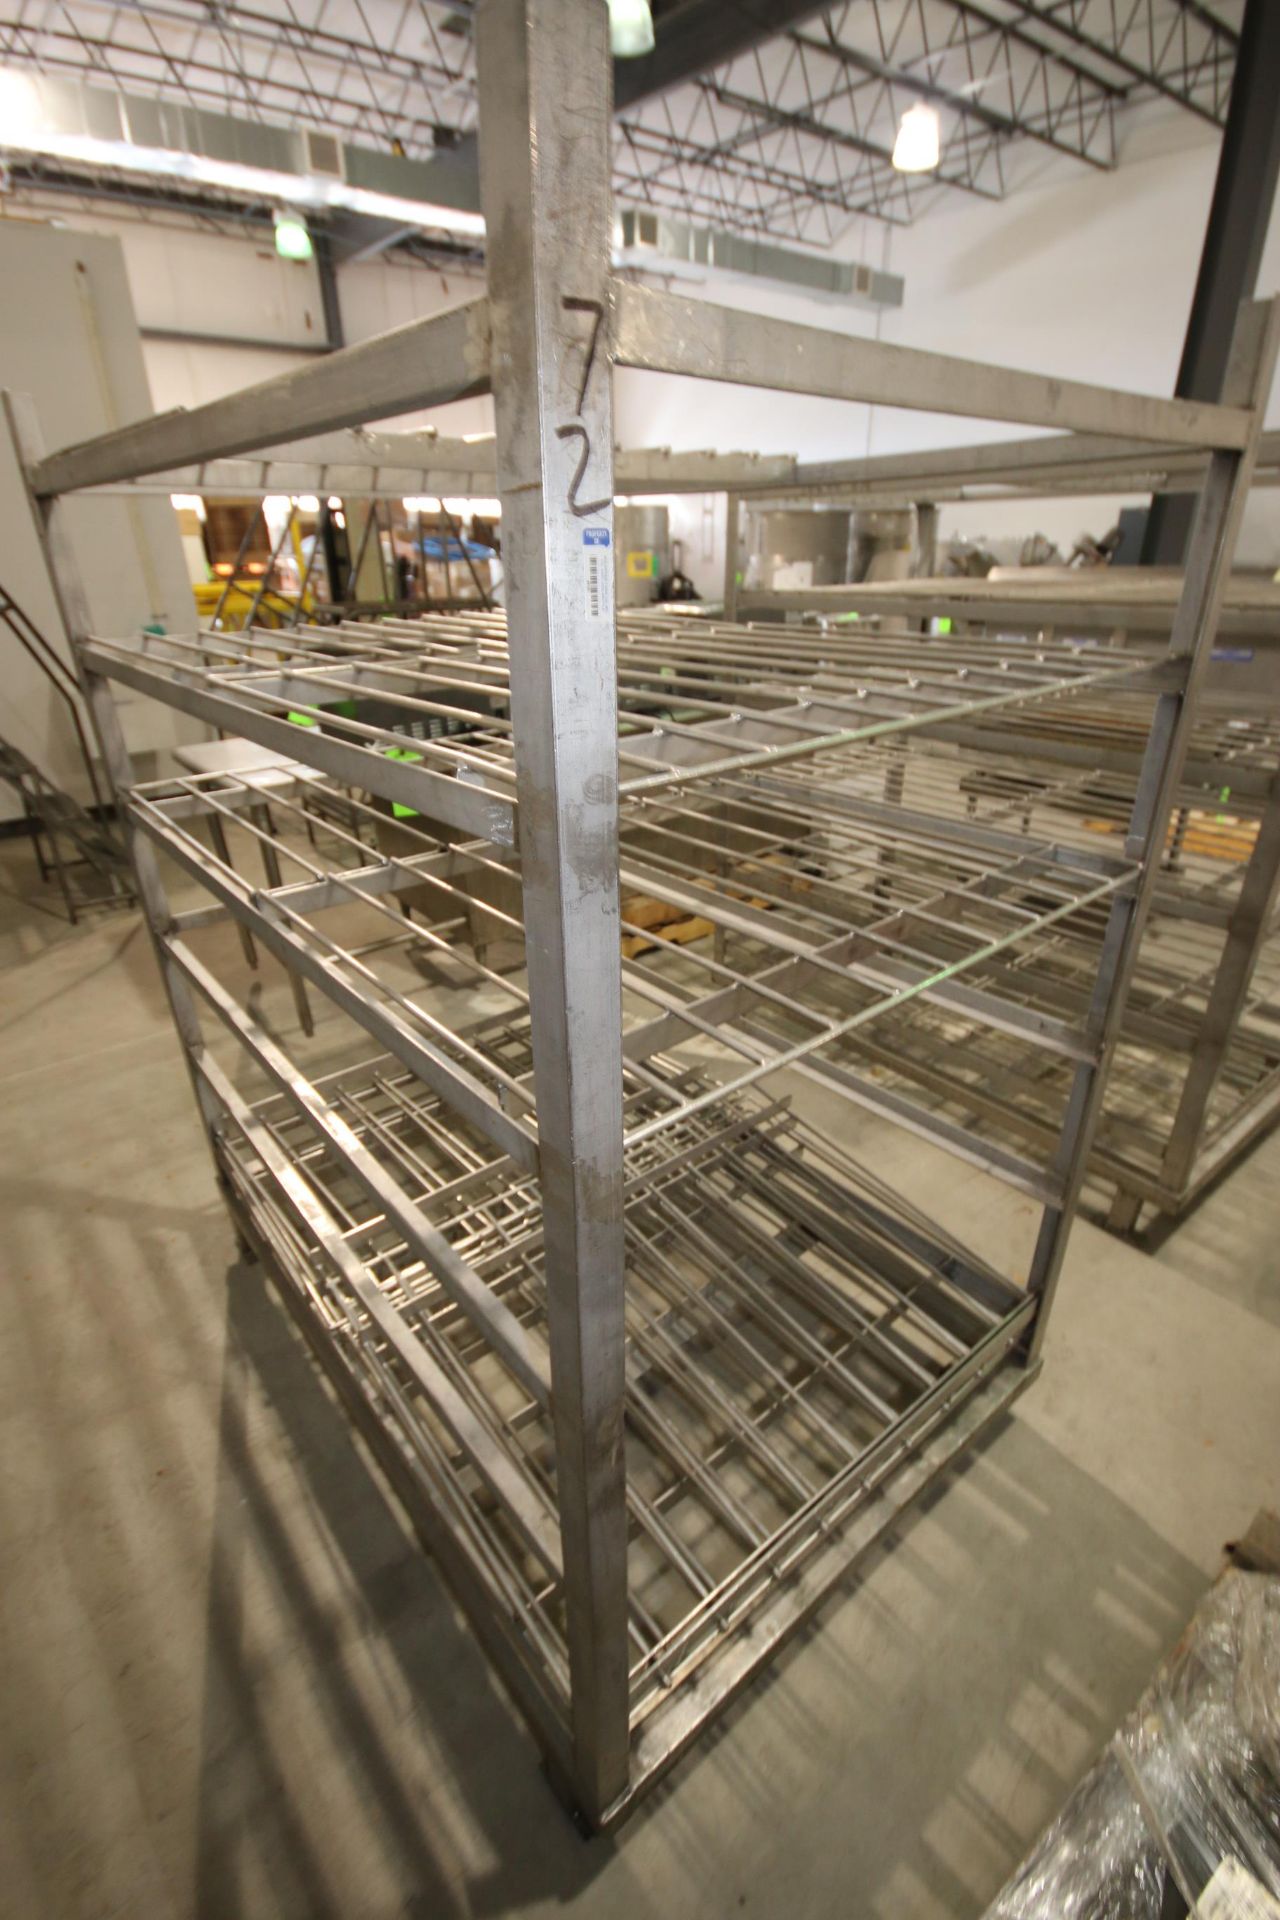 6-Shelf S/S Racks, Overall Dims.: Aprox. 61" L x 37" W x 70-1/2" H (LOCATED IN YOUNGSTOWN, OH) ( - Image 3 of 3